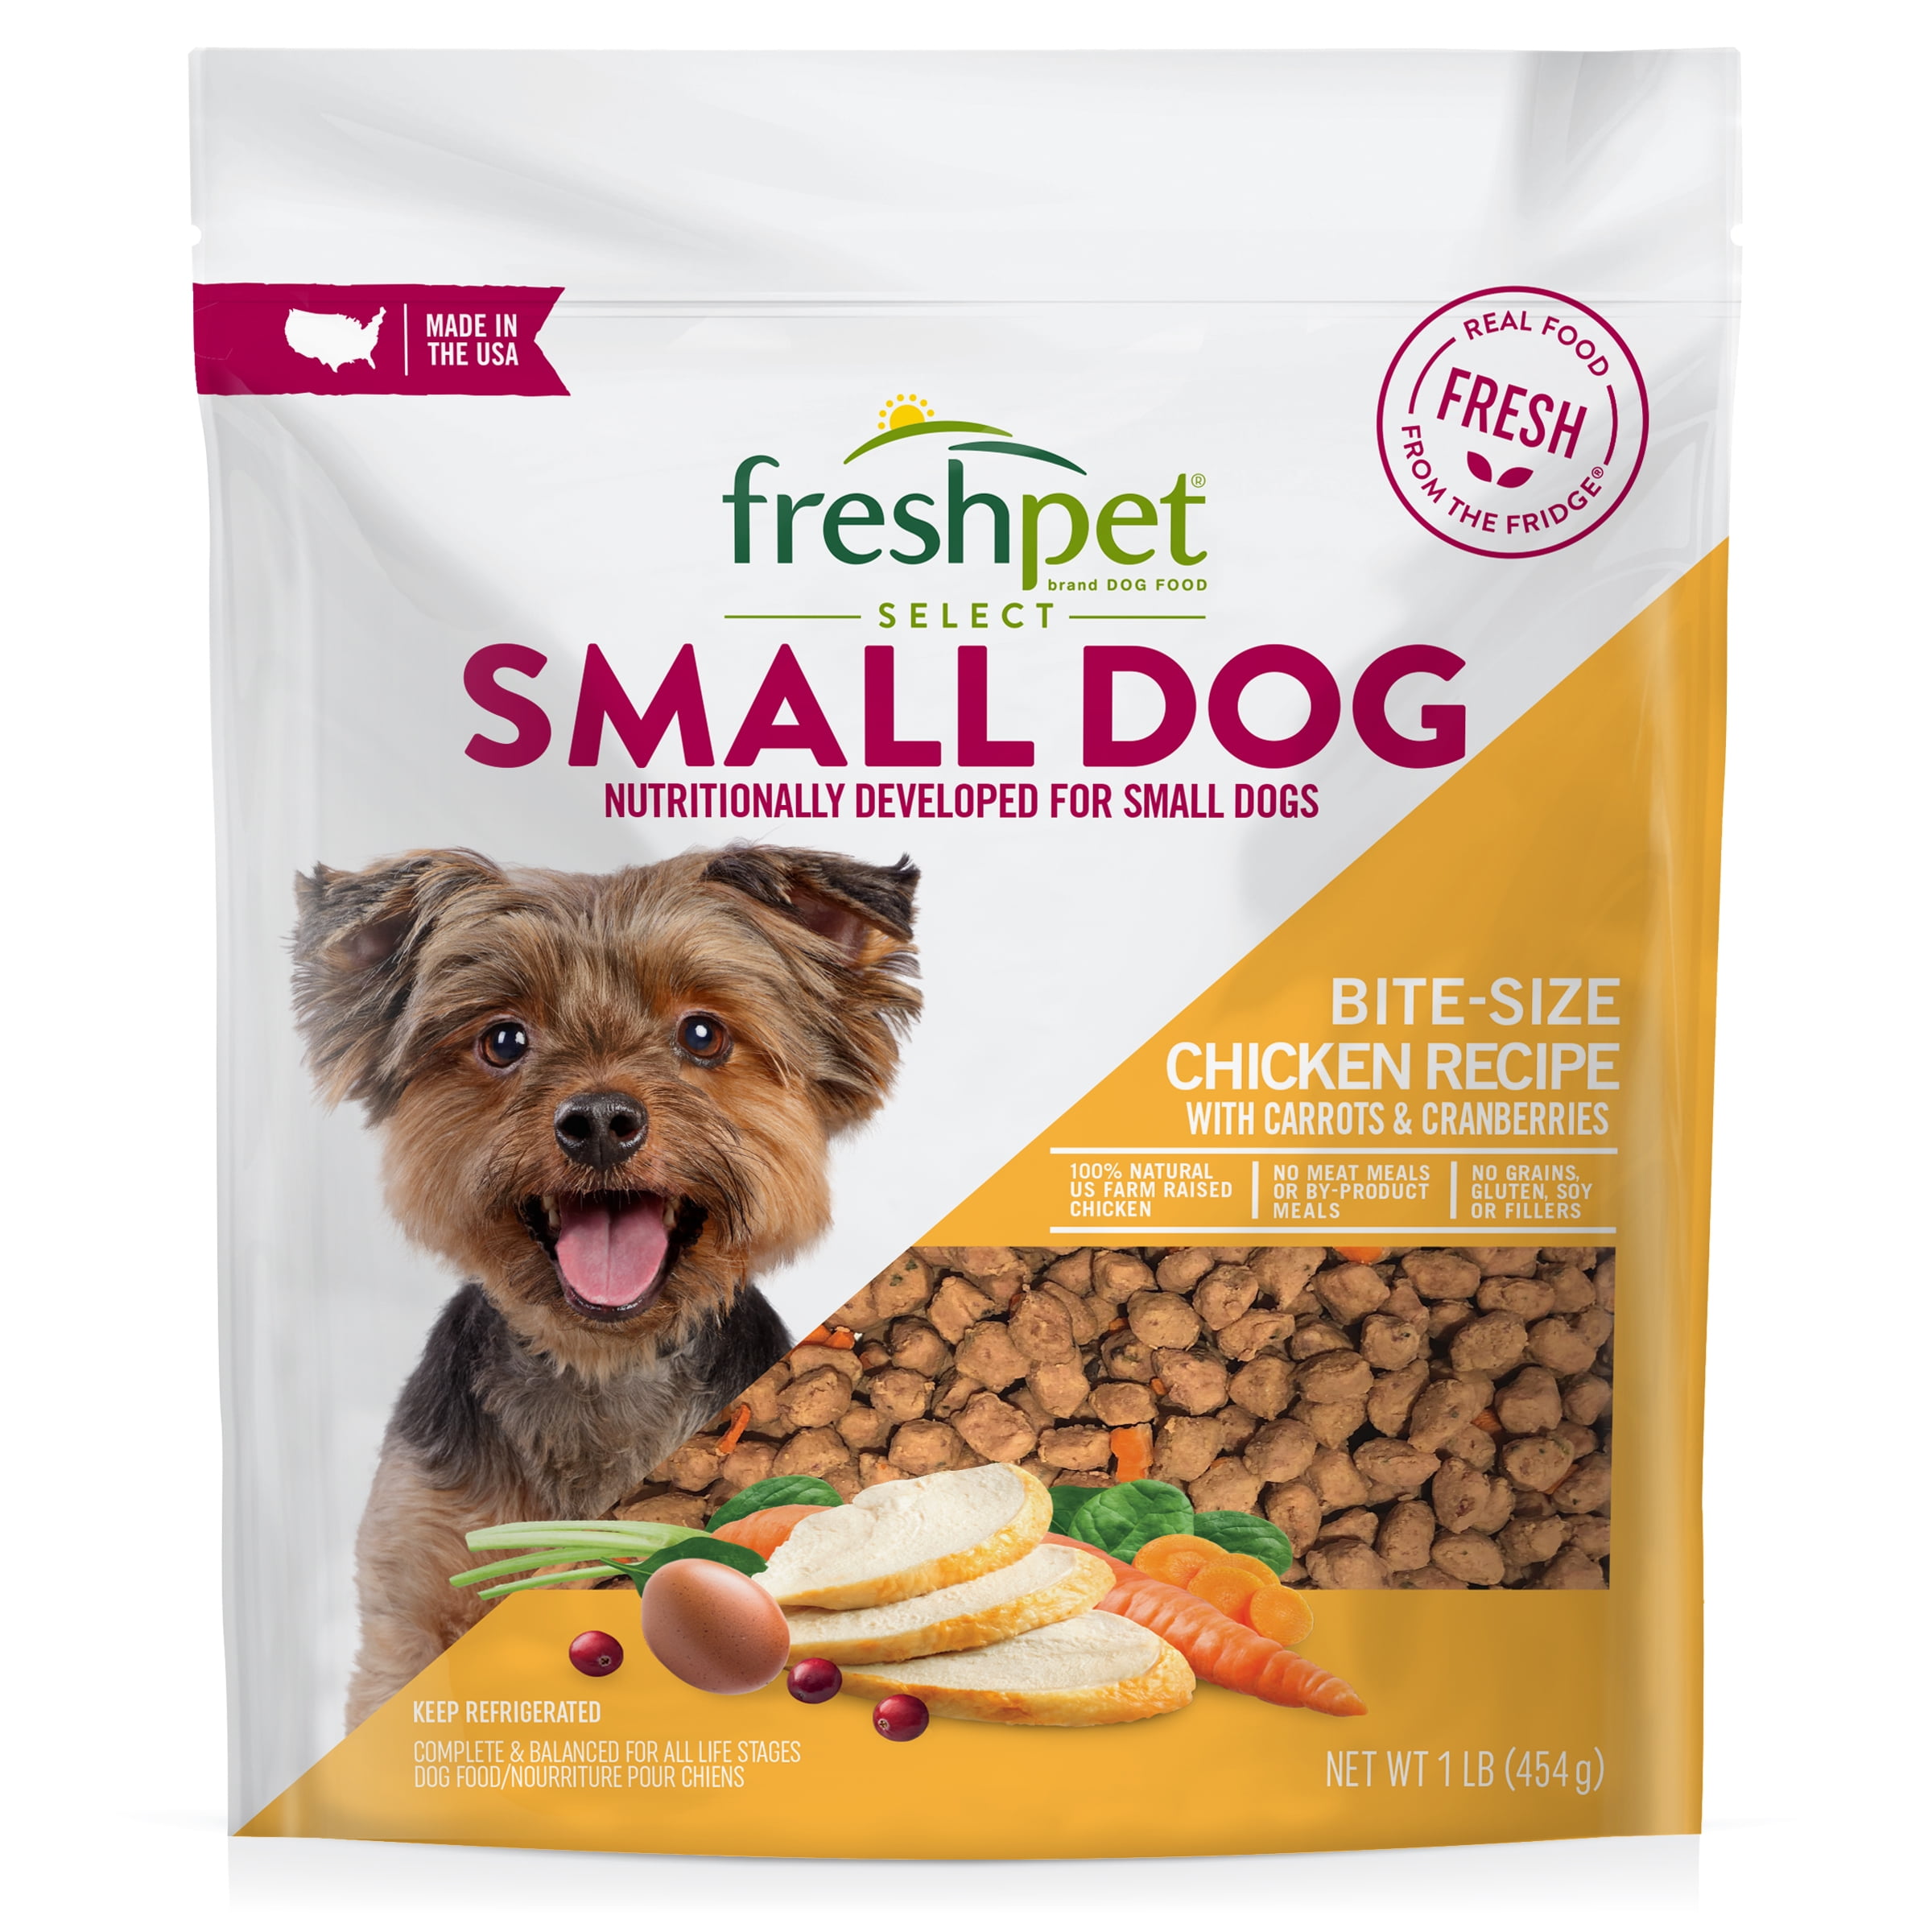 Freshpet Healthy & Natural Food for Small Dogs/Breeds